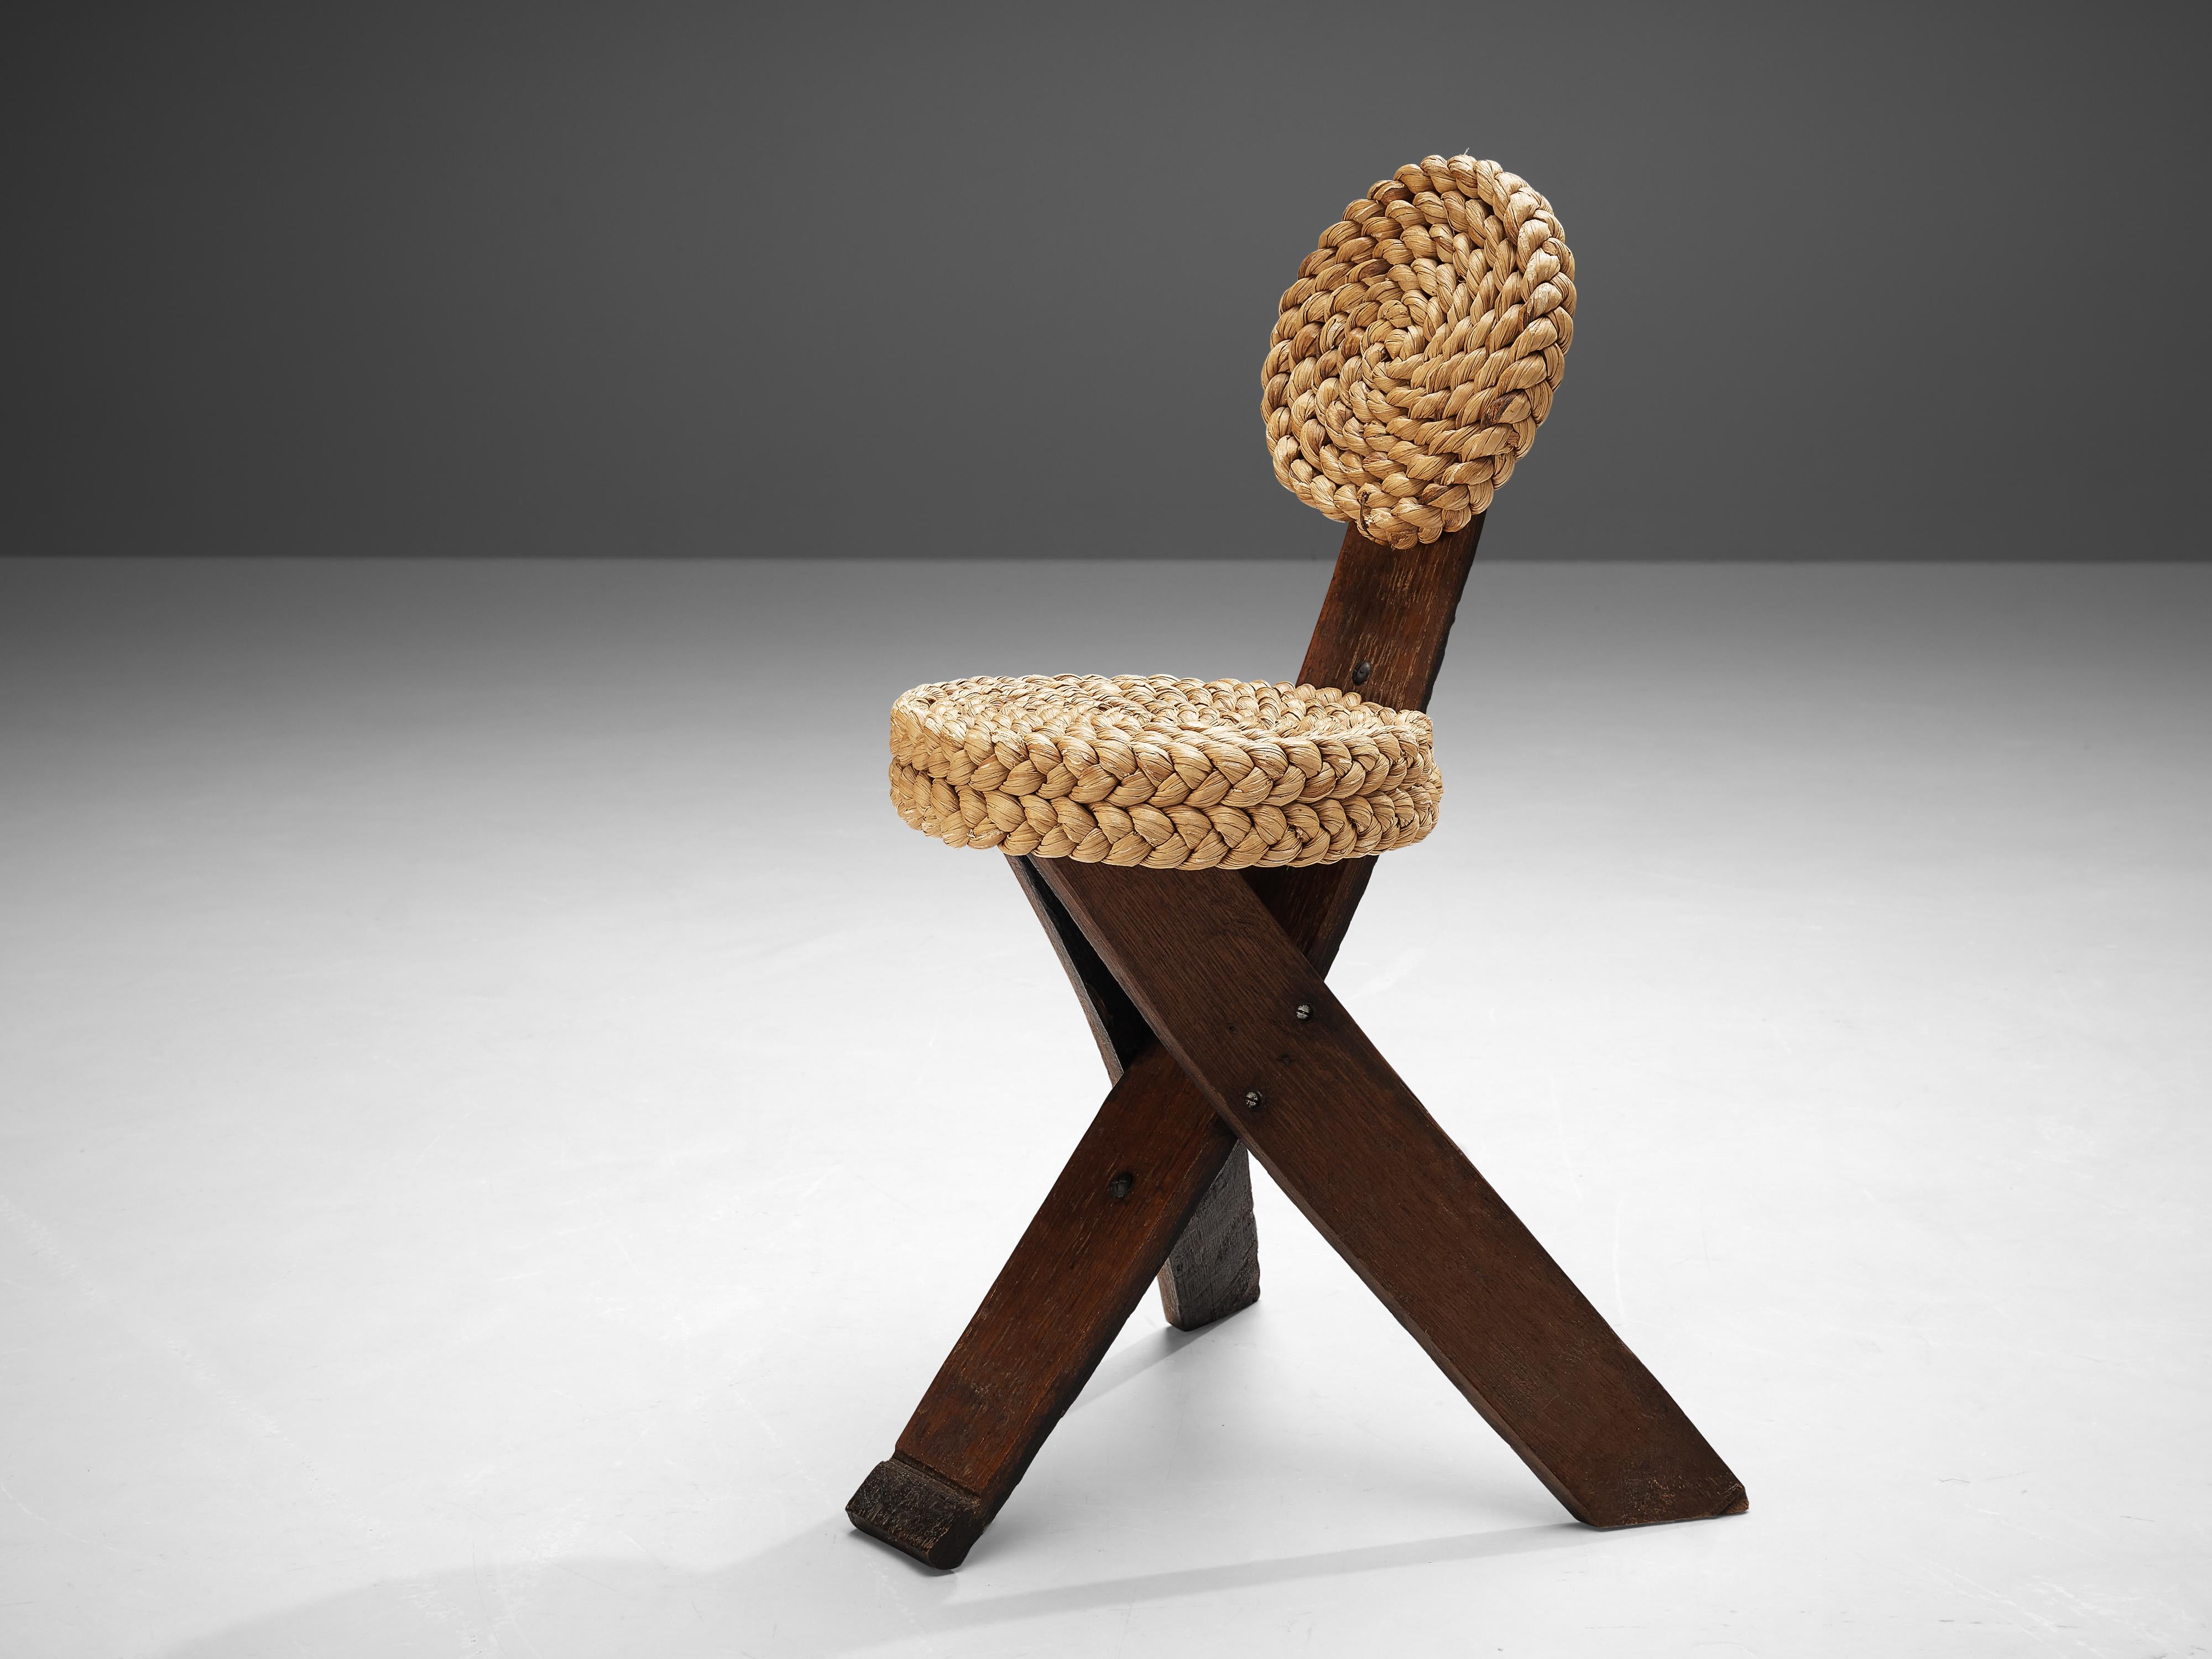 Adrien Audoux and Frida Minet, side chair, oak, straw, France, 1950s

This rare, sculptural side chair was created by the French designer couple Adrien Audoux and Frida Minet. The three flat legs are made of dark oak. One leg runs upwards and ends